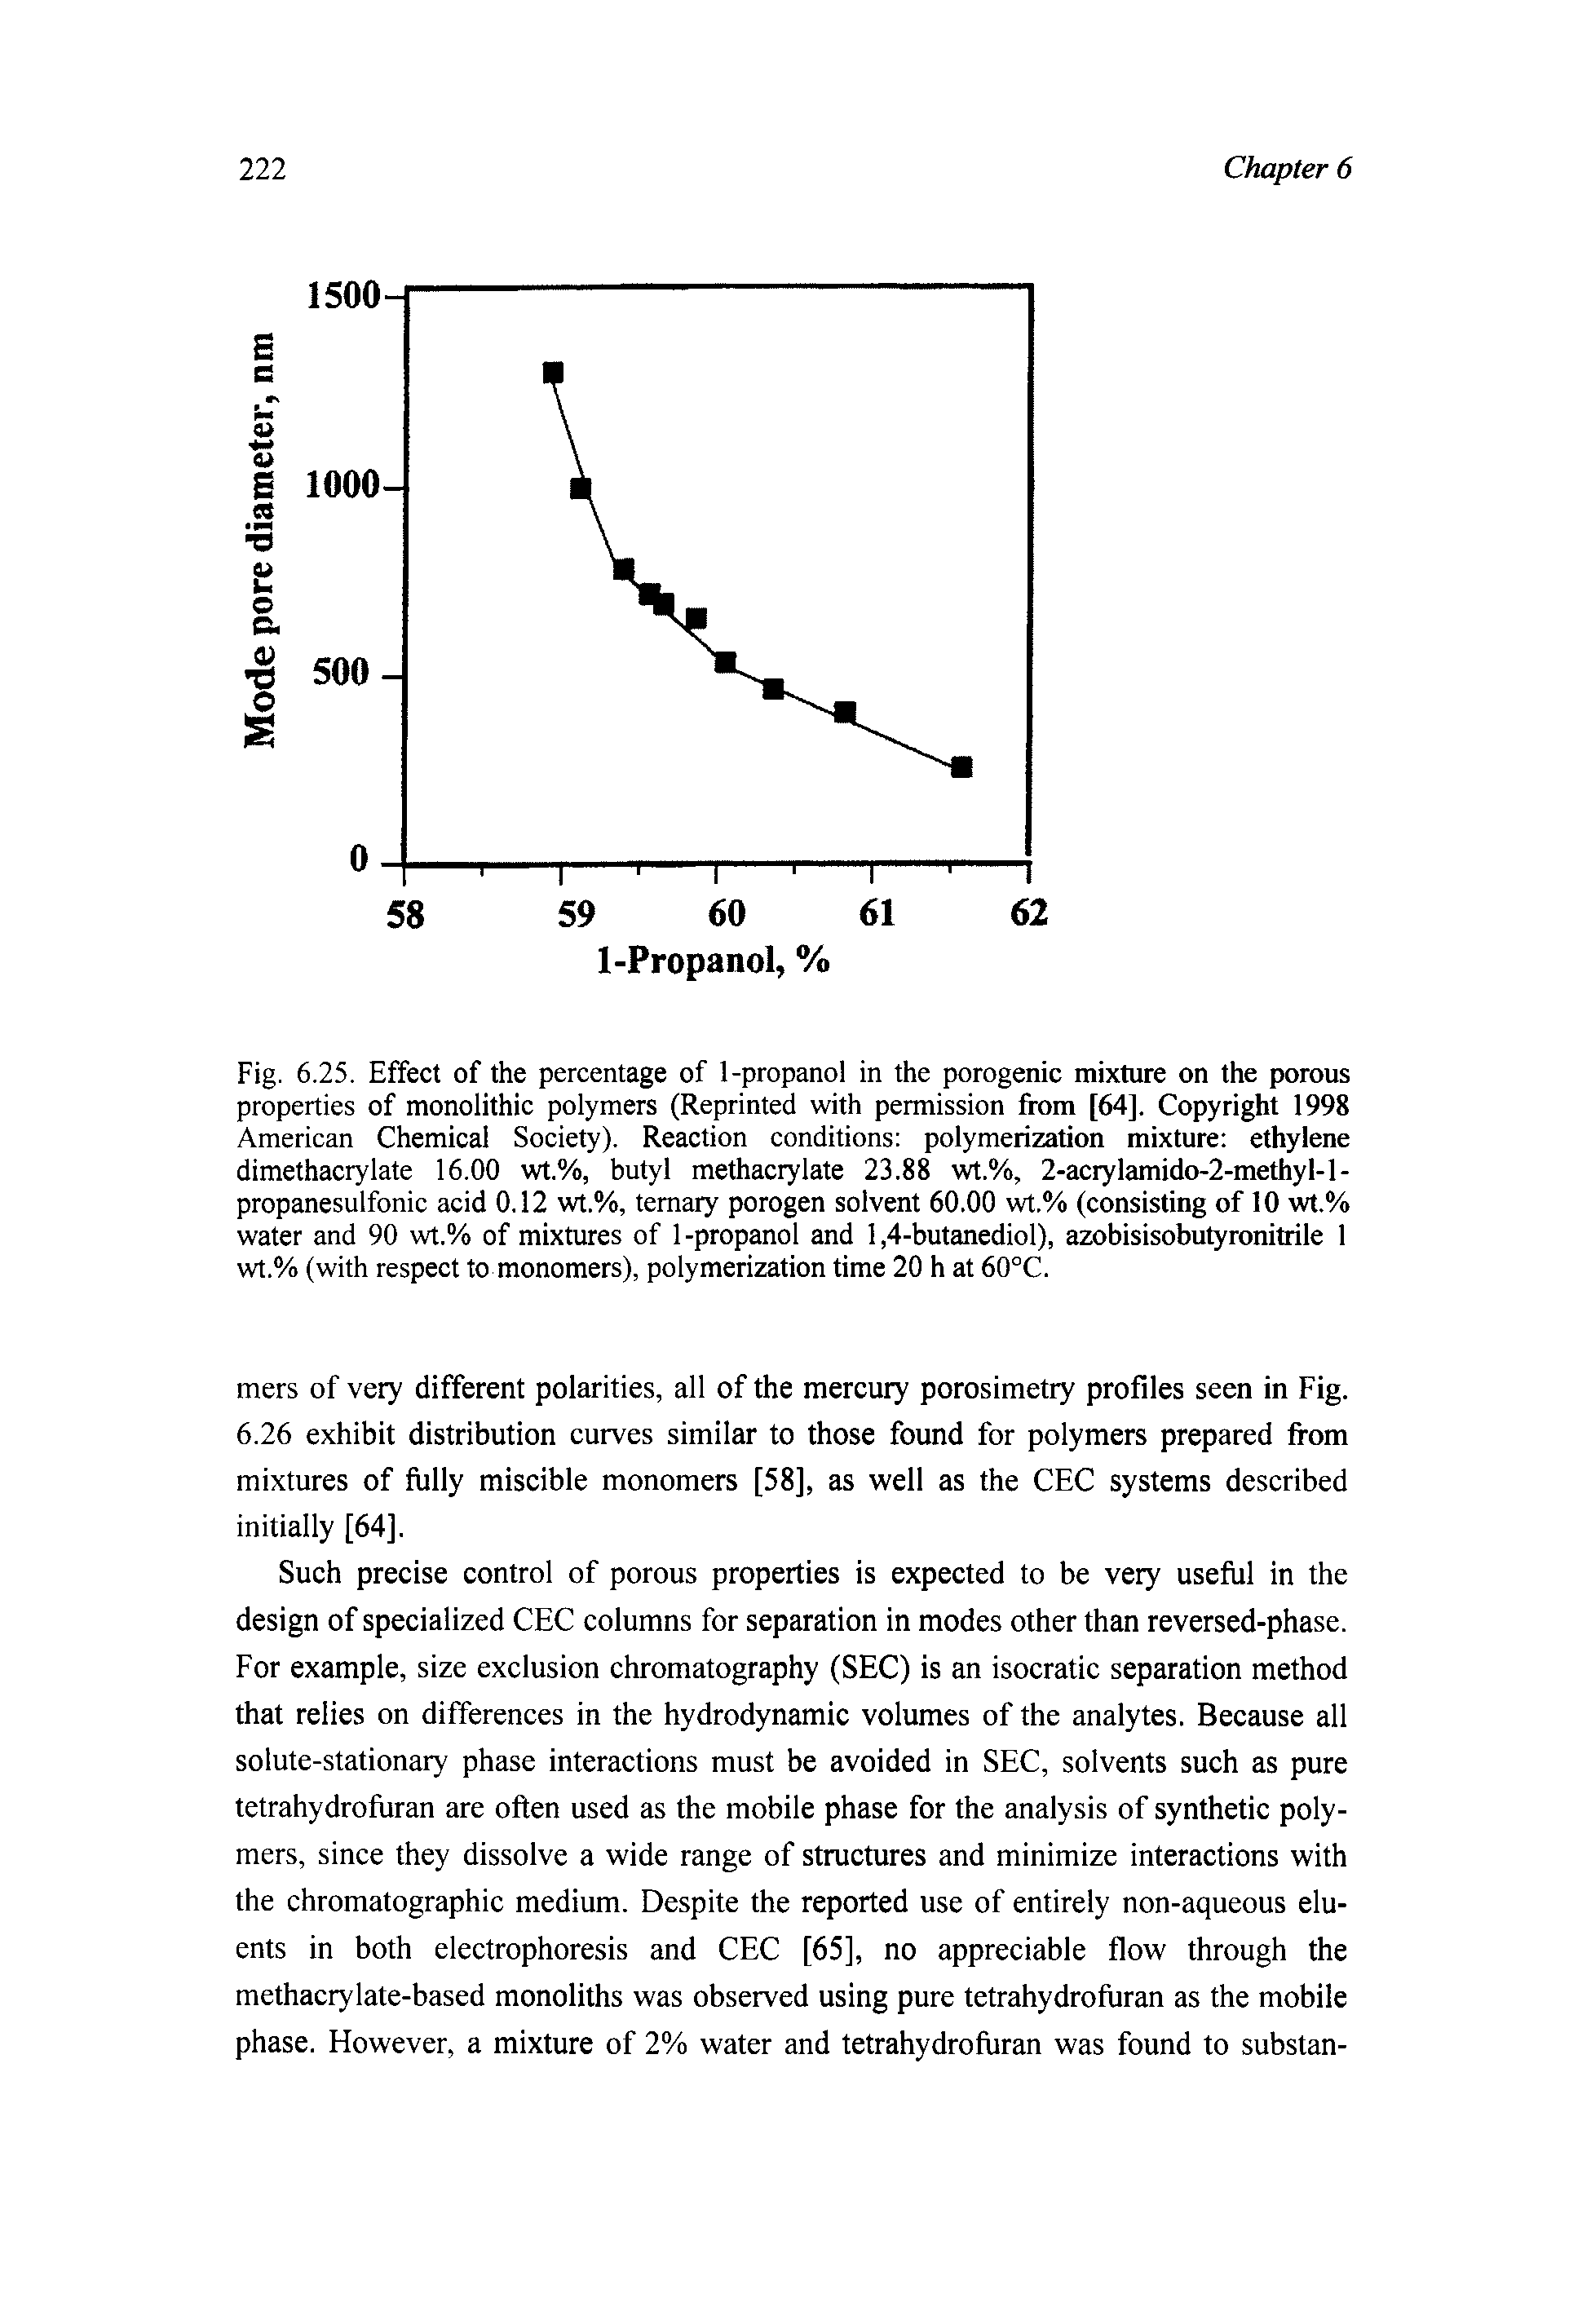 Fig. 6.25. Effect of the percentage of 1-propanol in the porogenic mixture on the porous properties of monolithic polymers (Reprinted with permission from [64], Copyright 1998 American Chemical Society). Reaction conditions polymerization mixture ethylene dimethacrylate 16.00 wt.%, butyl methacrylate 23.88 wt.%, 2-acrylamido-2-methyl-l-propanesulfonic acid 0.12 wt.%, ternary porogen solvent 60.00 wt.% (consisting of 10 wt.% water and 90 wt.% of mixtures of 1-propanol and 1,4-butanediol), azobisisobutyronitrile 1 wt.% (with respect to monomers), polymerization time 20 h at 60°C.